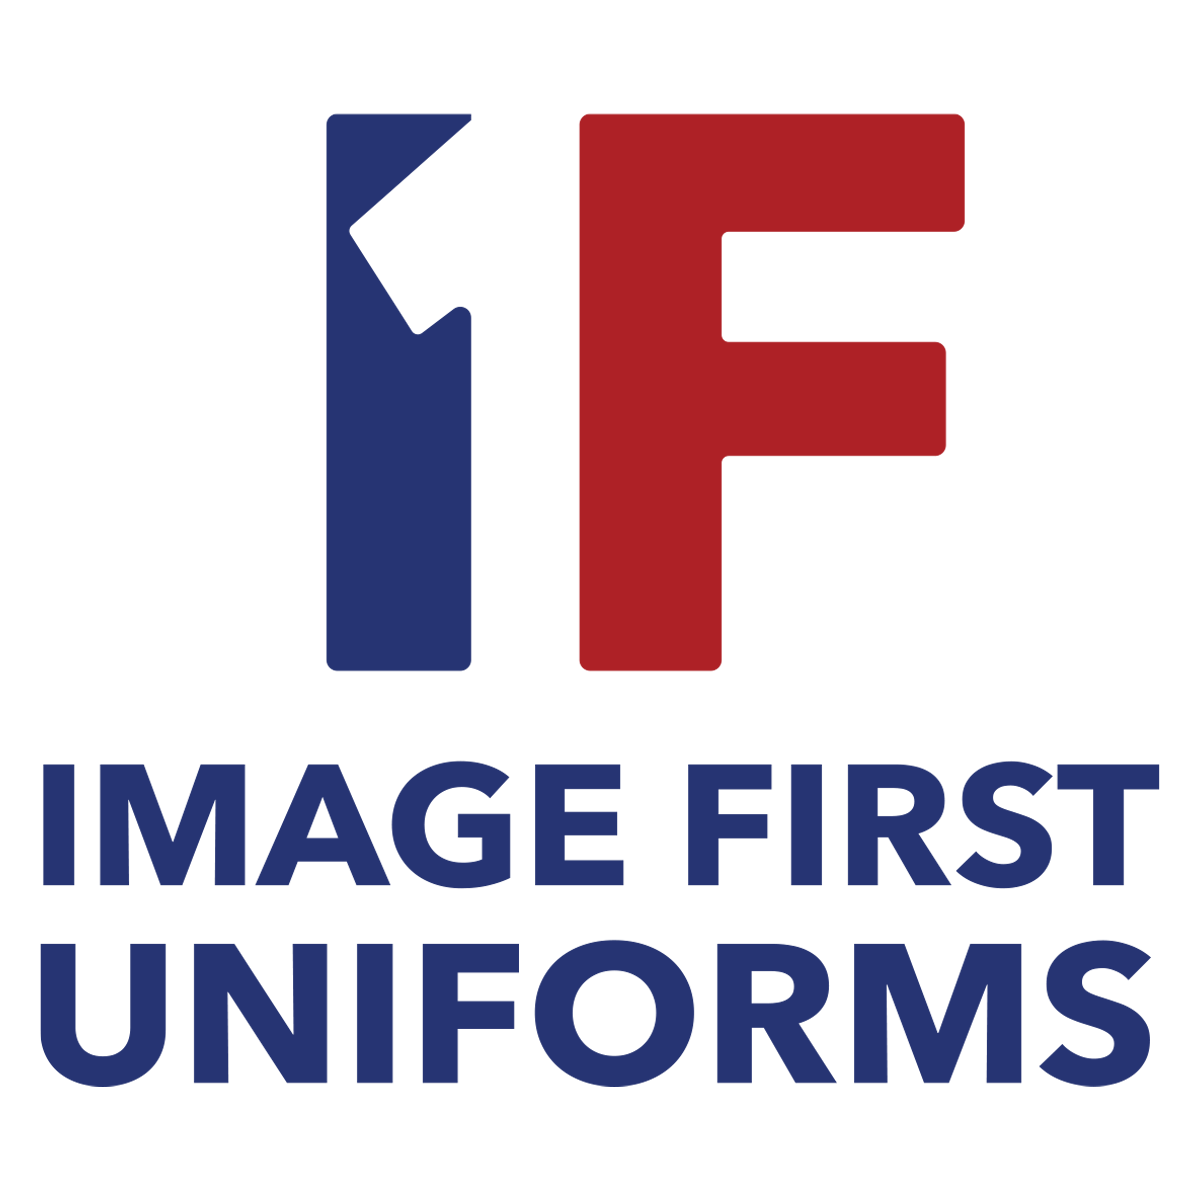 Image First Uniforms